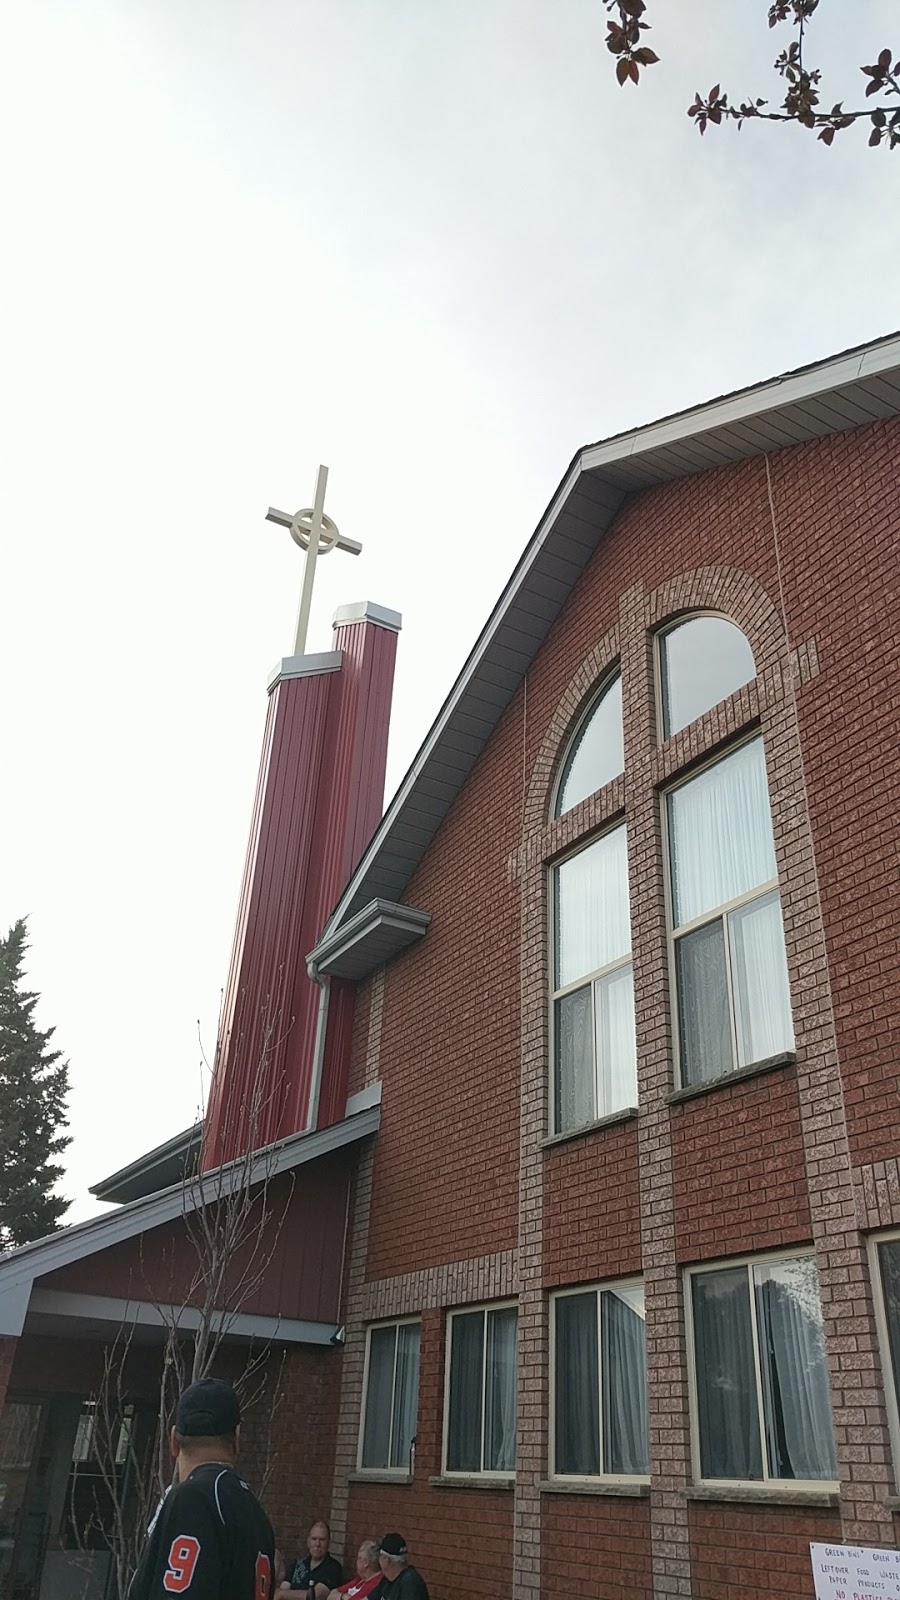 Kitchener East Presbyterian Church | church | 10 Zeller Dr, Kitchener, ON N2A 4A8, Canada | 5197489786 OR +1 519-748-9786